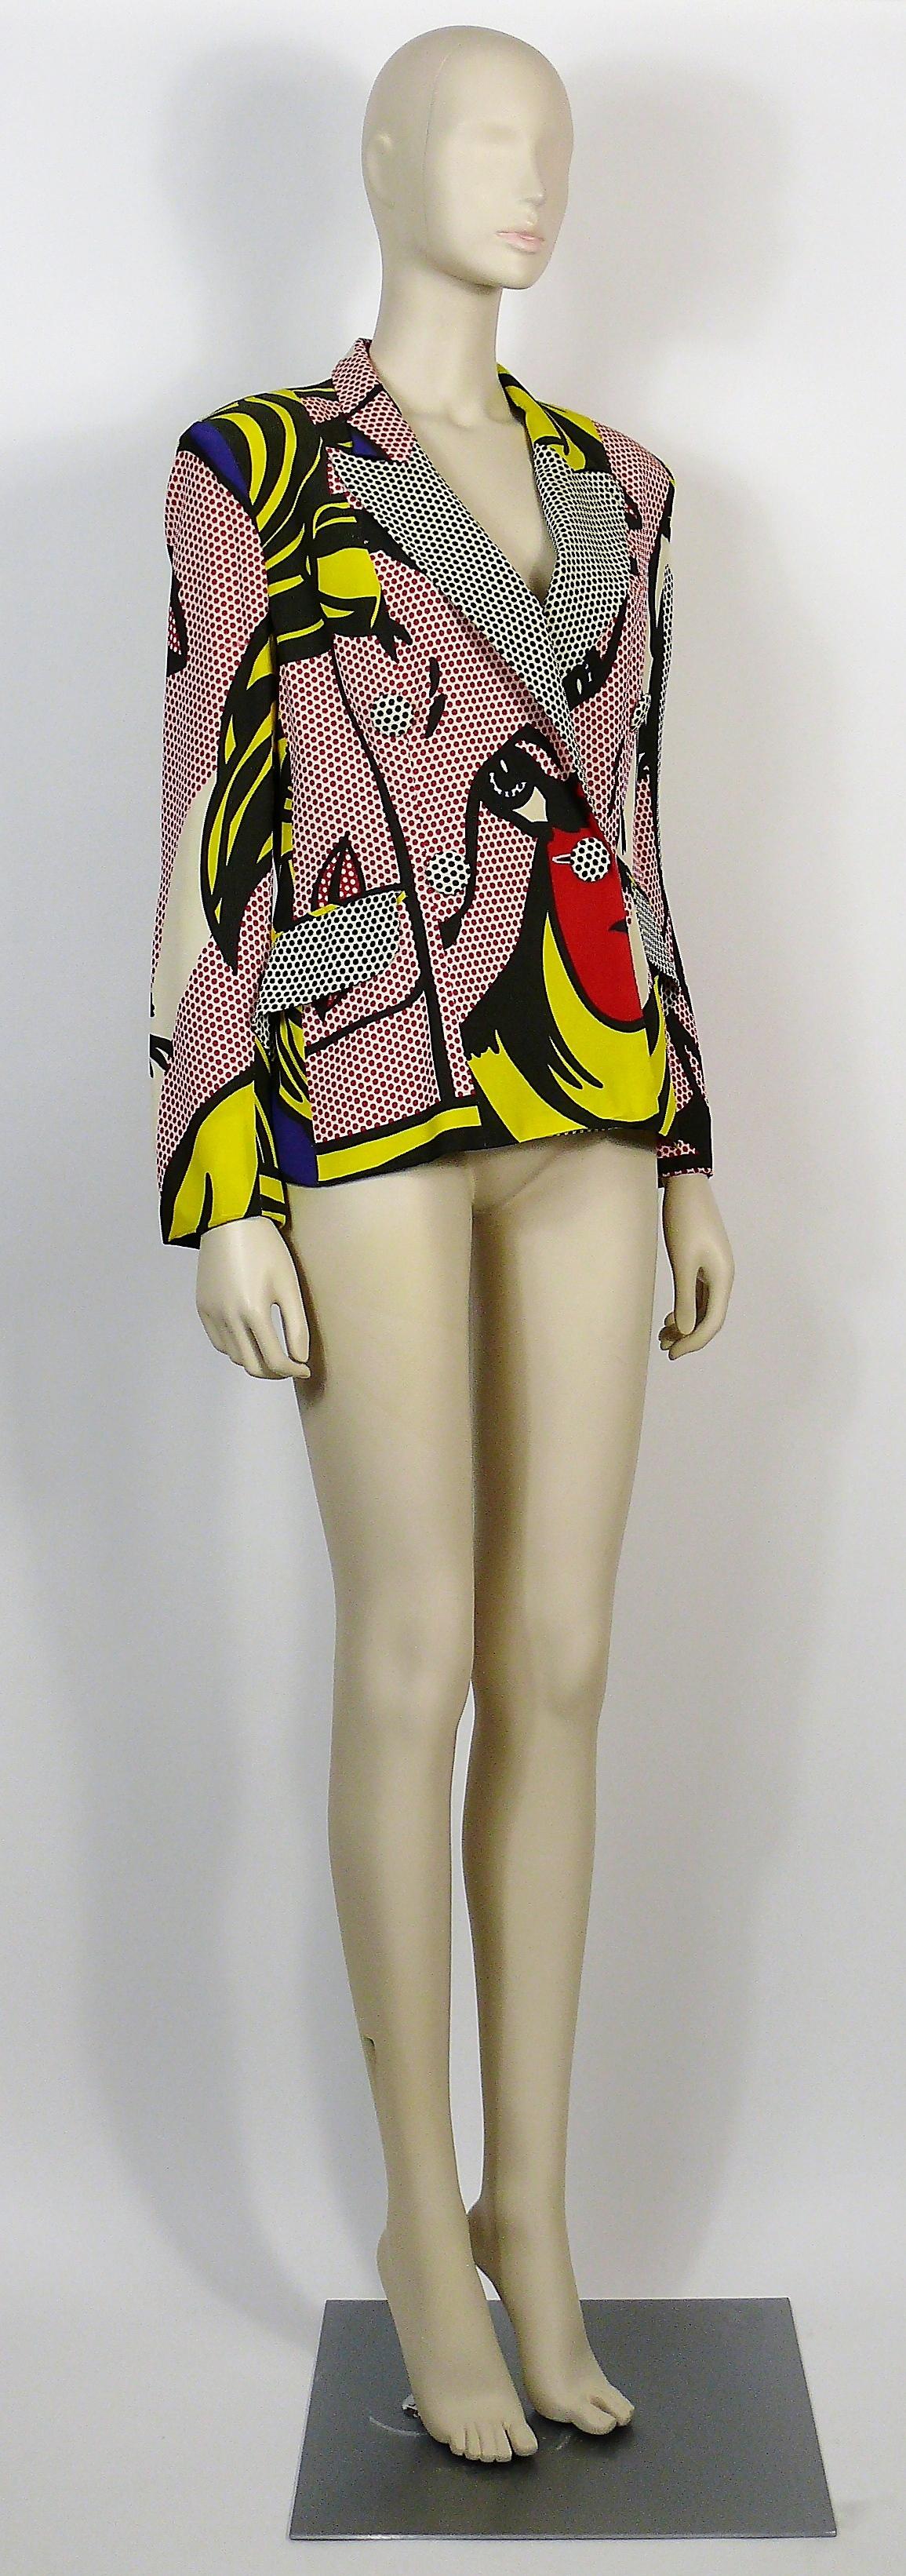 MOSCHINO rare and iconic pop-art blazer featuring an outsized newspaper-type print with vribrant colors. Tribute to the Amercian artist ROY LICHTENSTEIN.

MOSCHINO Spring Summer 1991 - Collection n°6.

This iconic piece features in the permanent